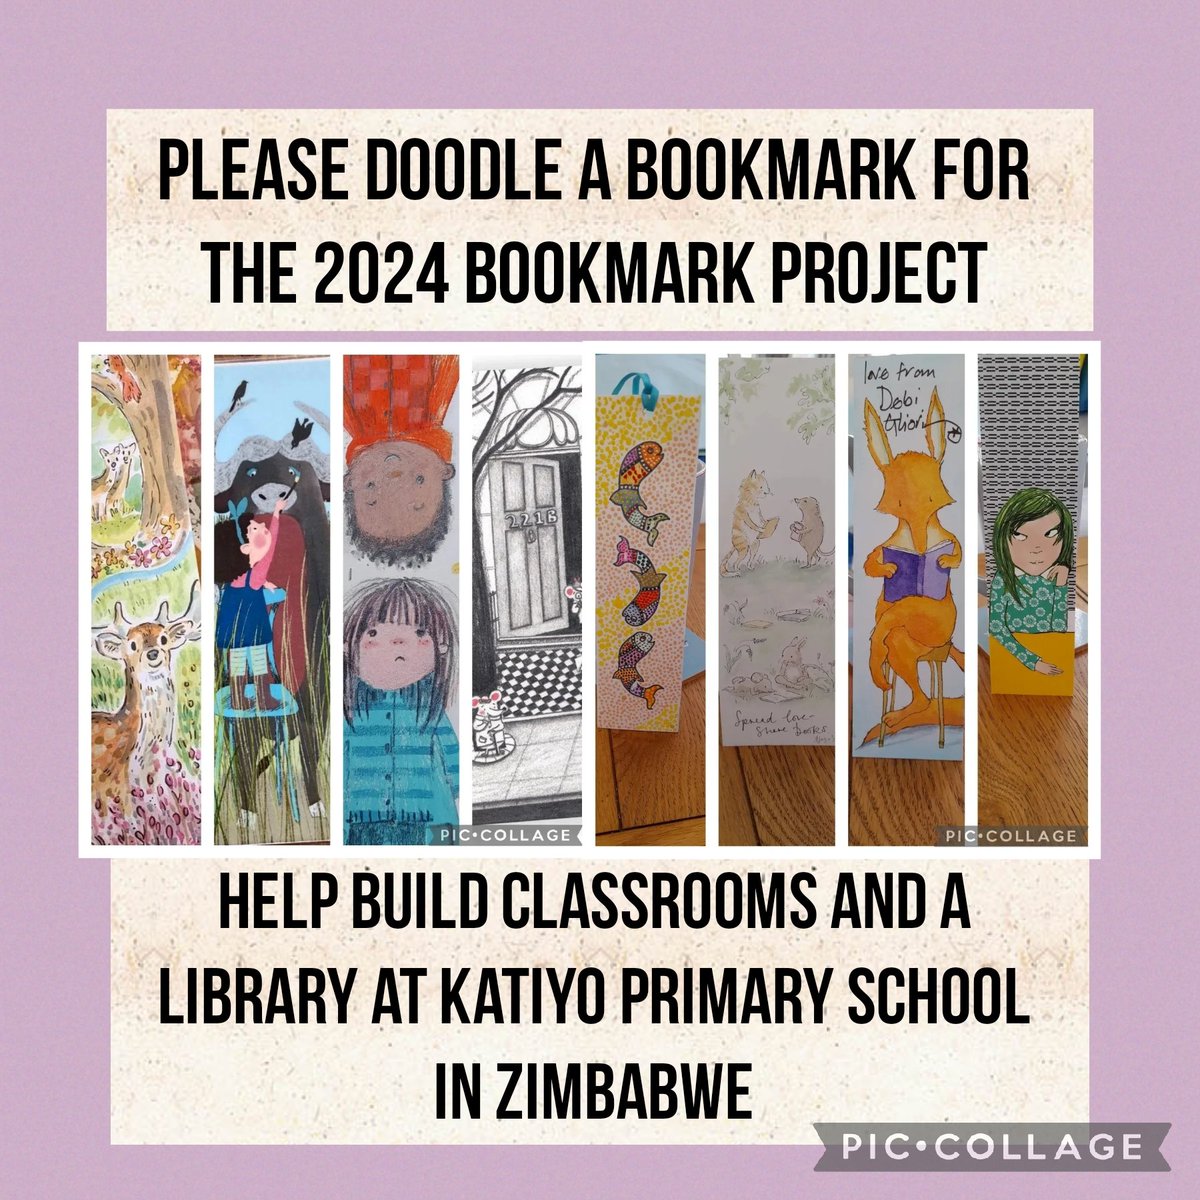 Authors illustrators and celebrities please will you doodle a bookmark for the #BookmarkProject & help us raise money for Katiyo Primary School in Zimbabwe Please tag folks you'd like to take part, more info here bookmarkproject.co.uk Please RT